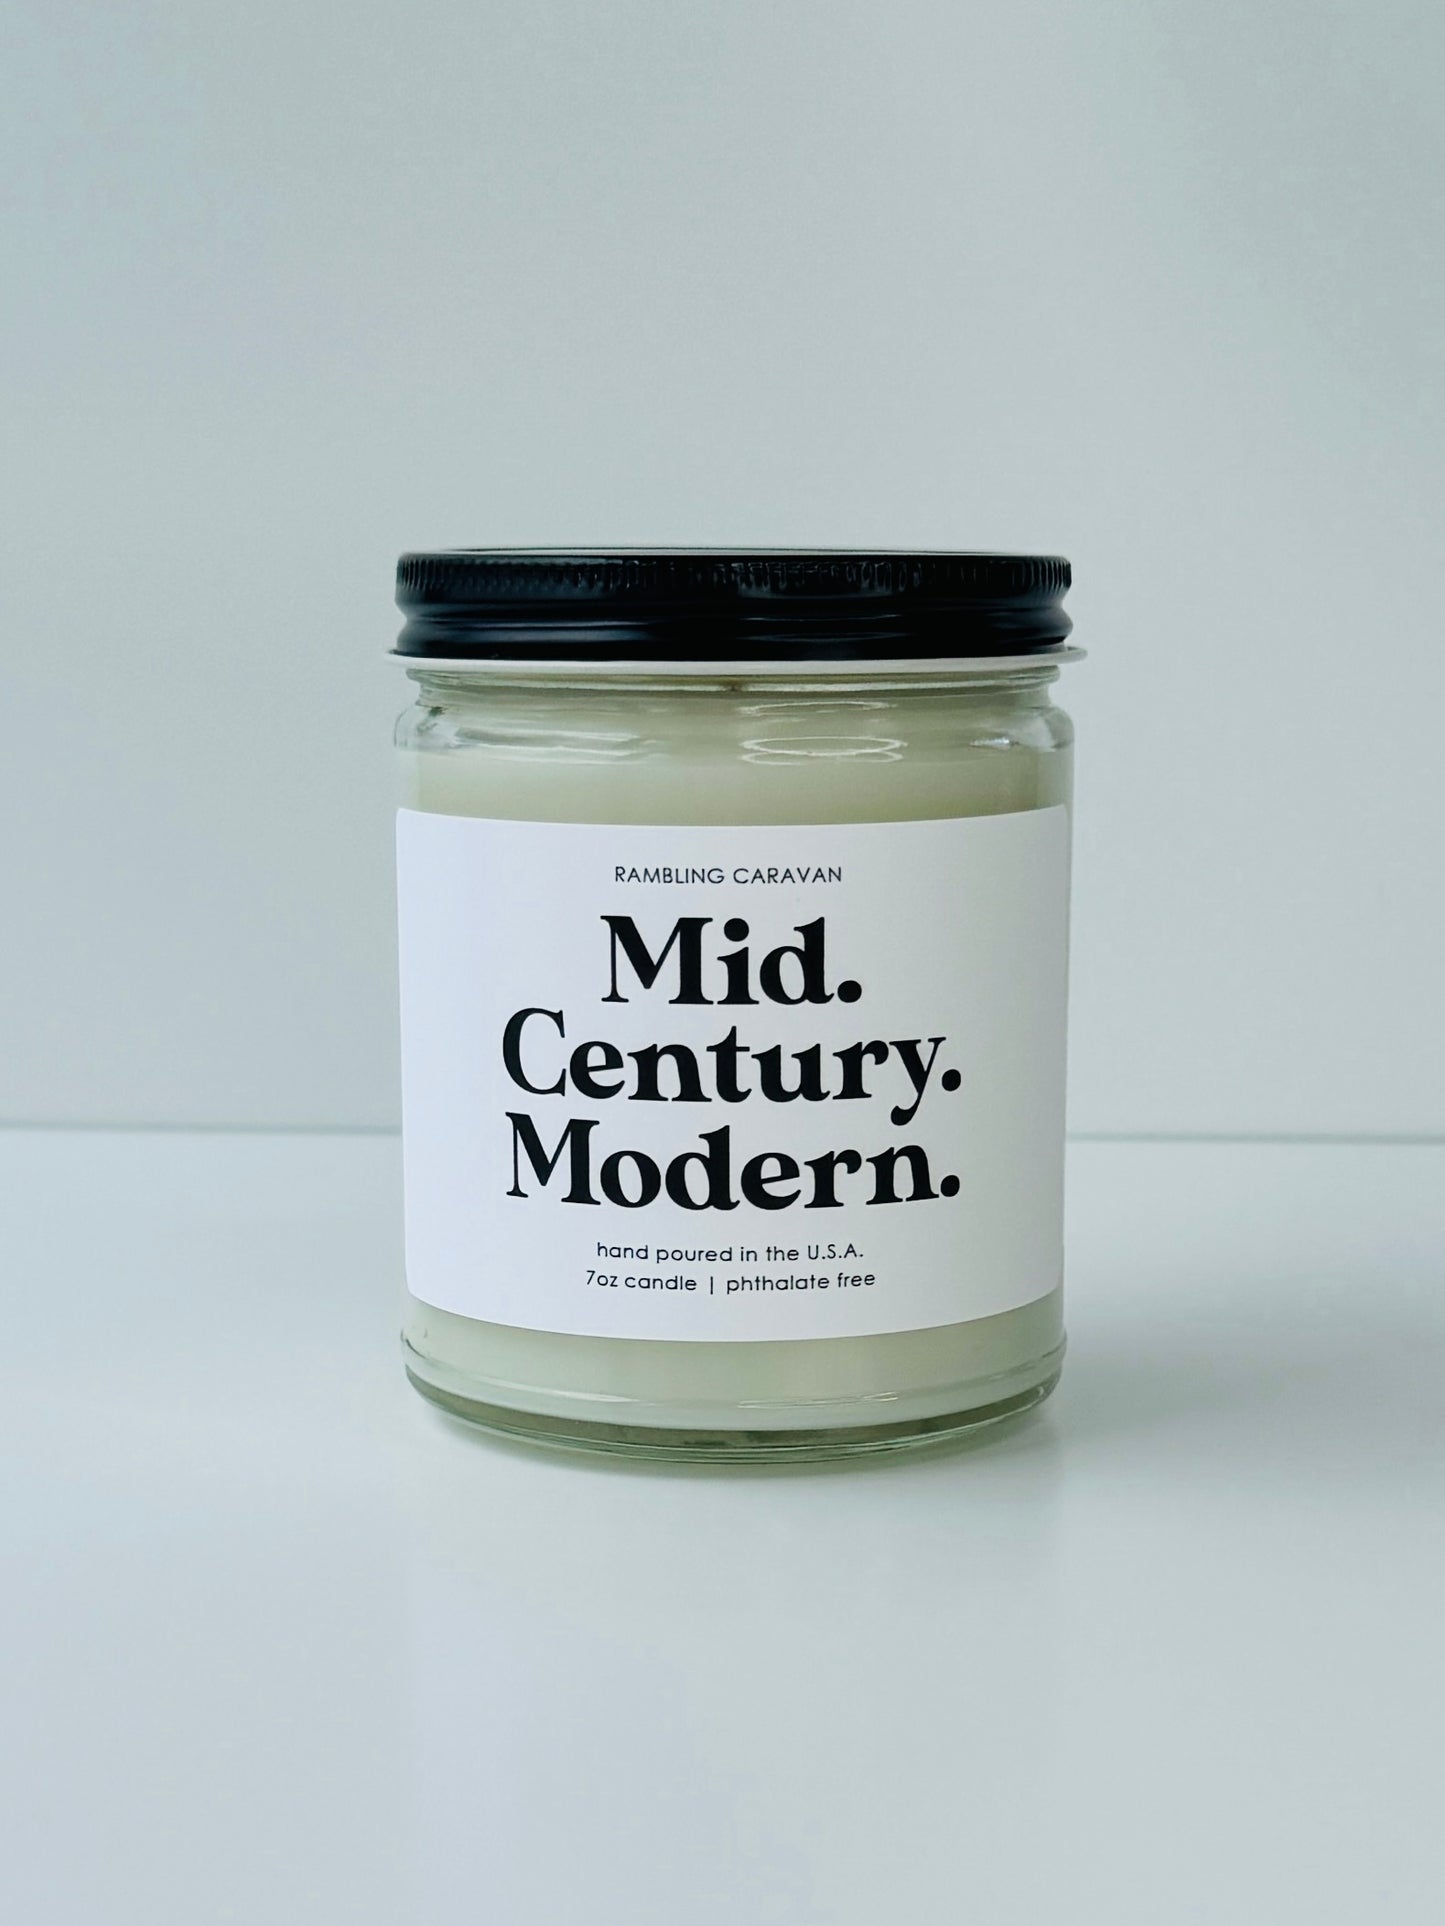 Mid. Century. Modern. Candle